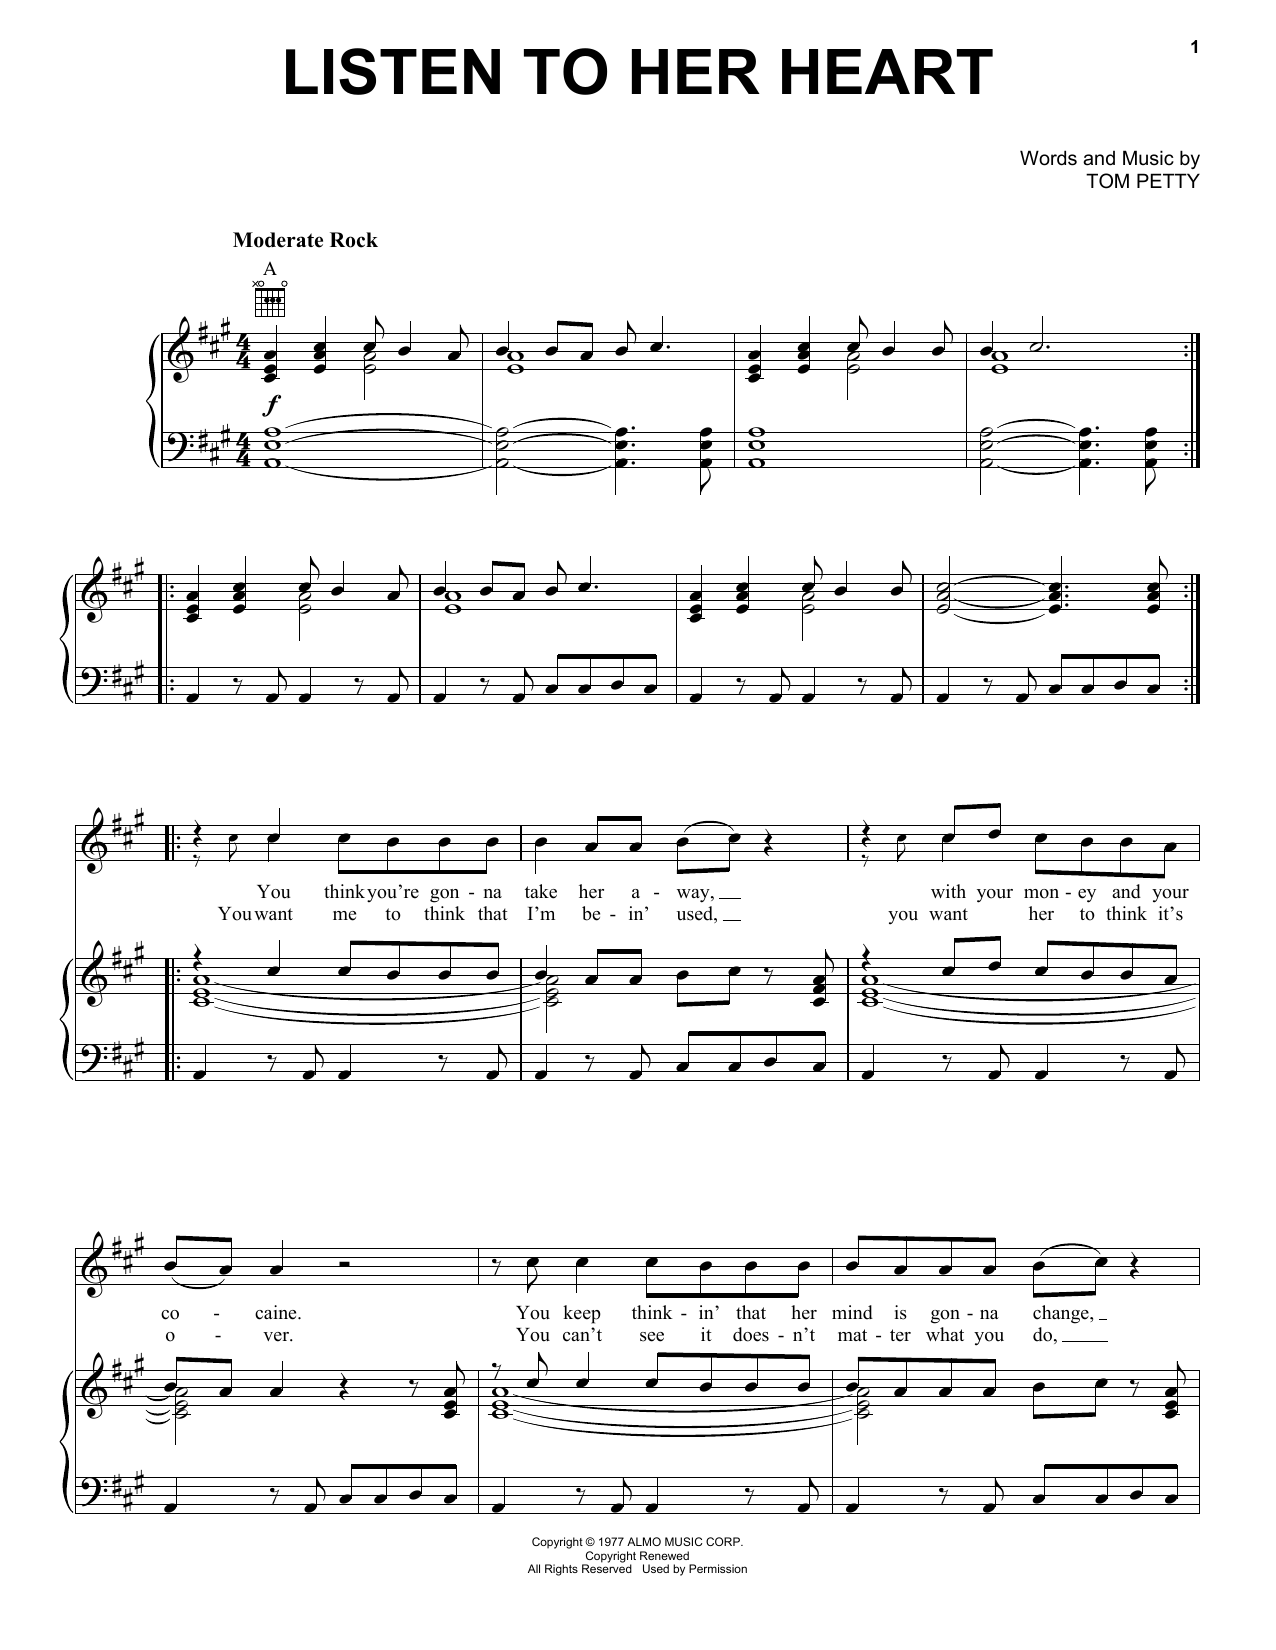 Tom Petty And The Heartbreakers Listen To Her Heart sheet music notes and chords. Download Printable PDF.